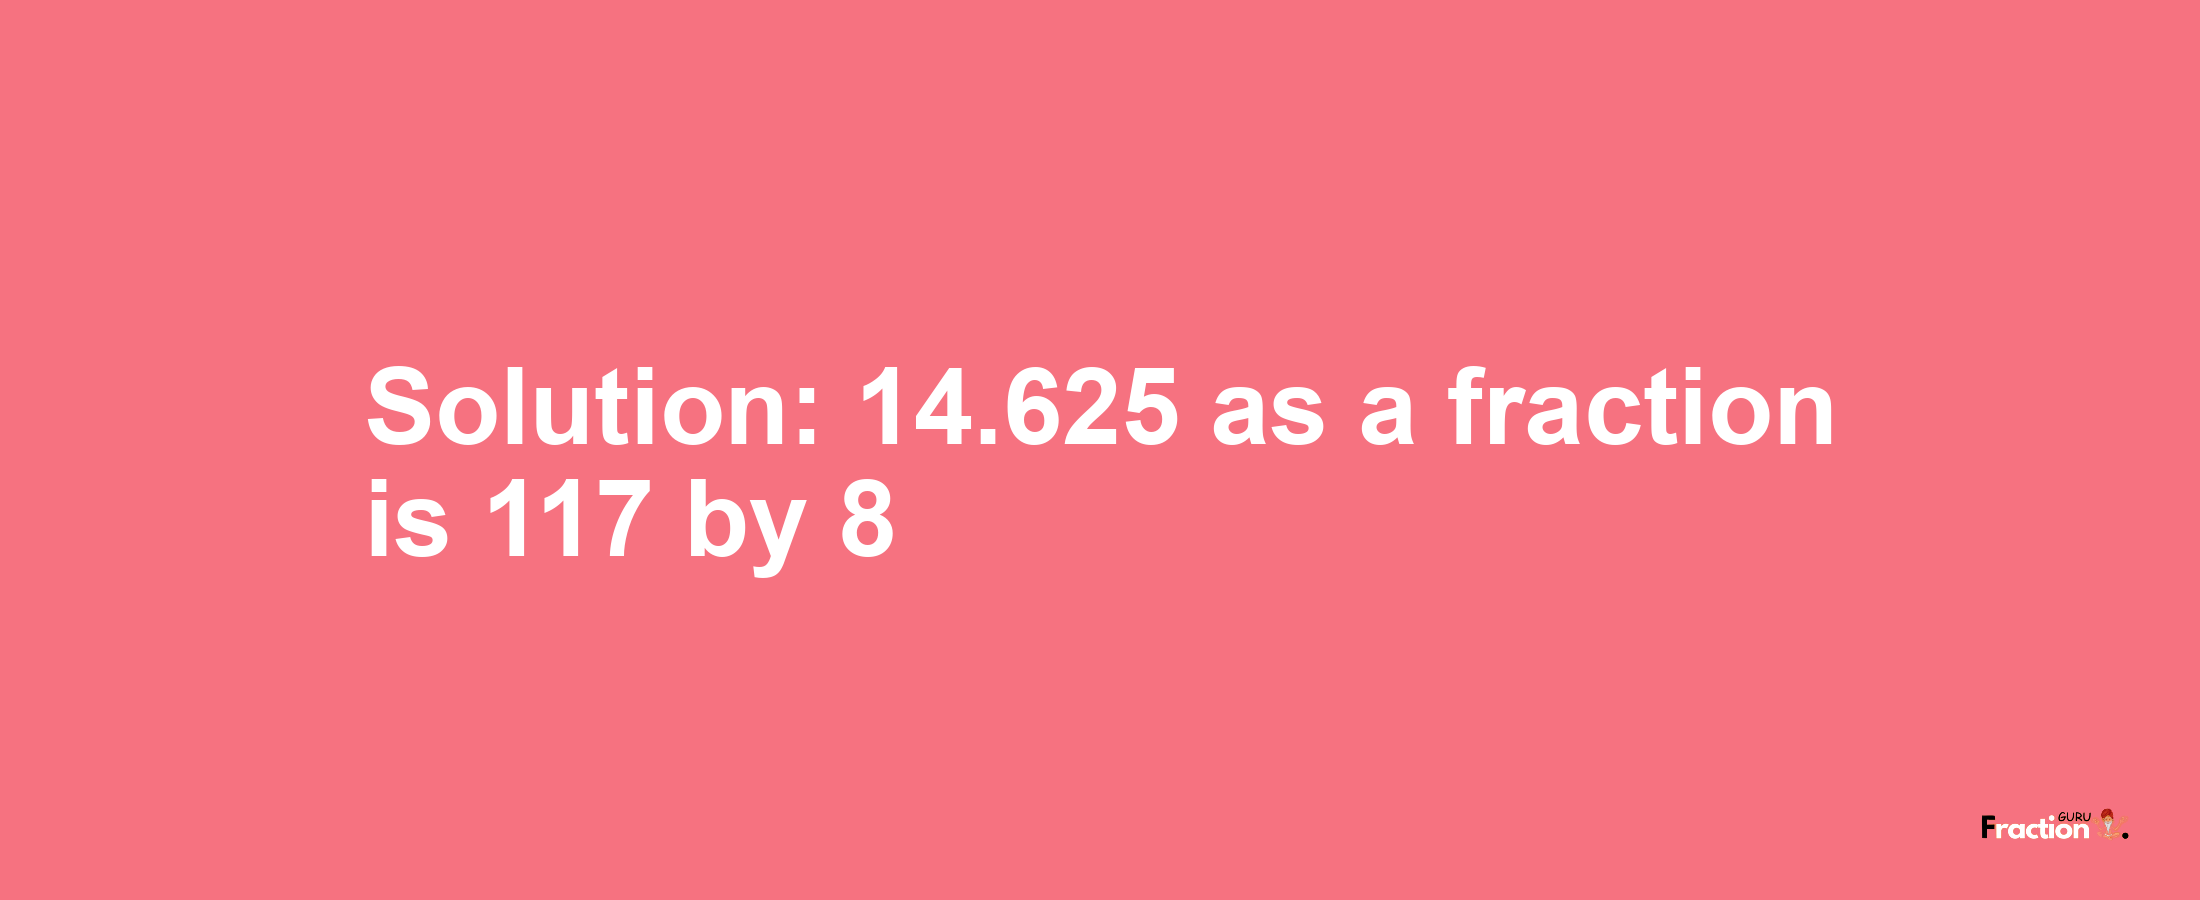 Solution:14.625 as a fraction is 117/8